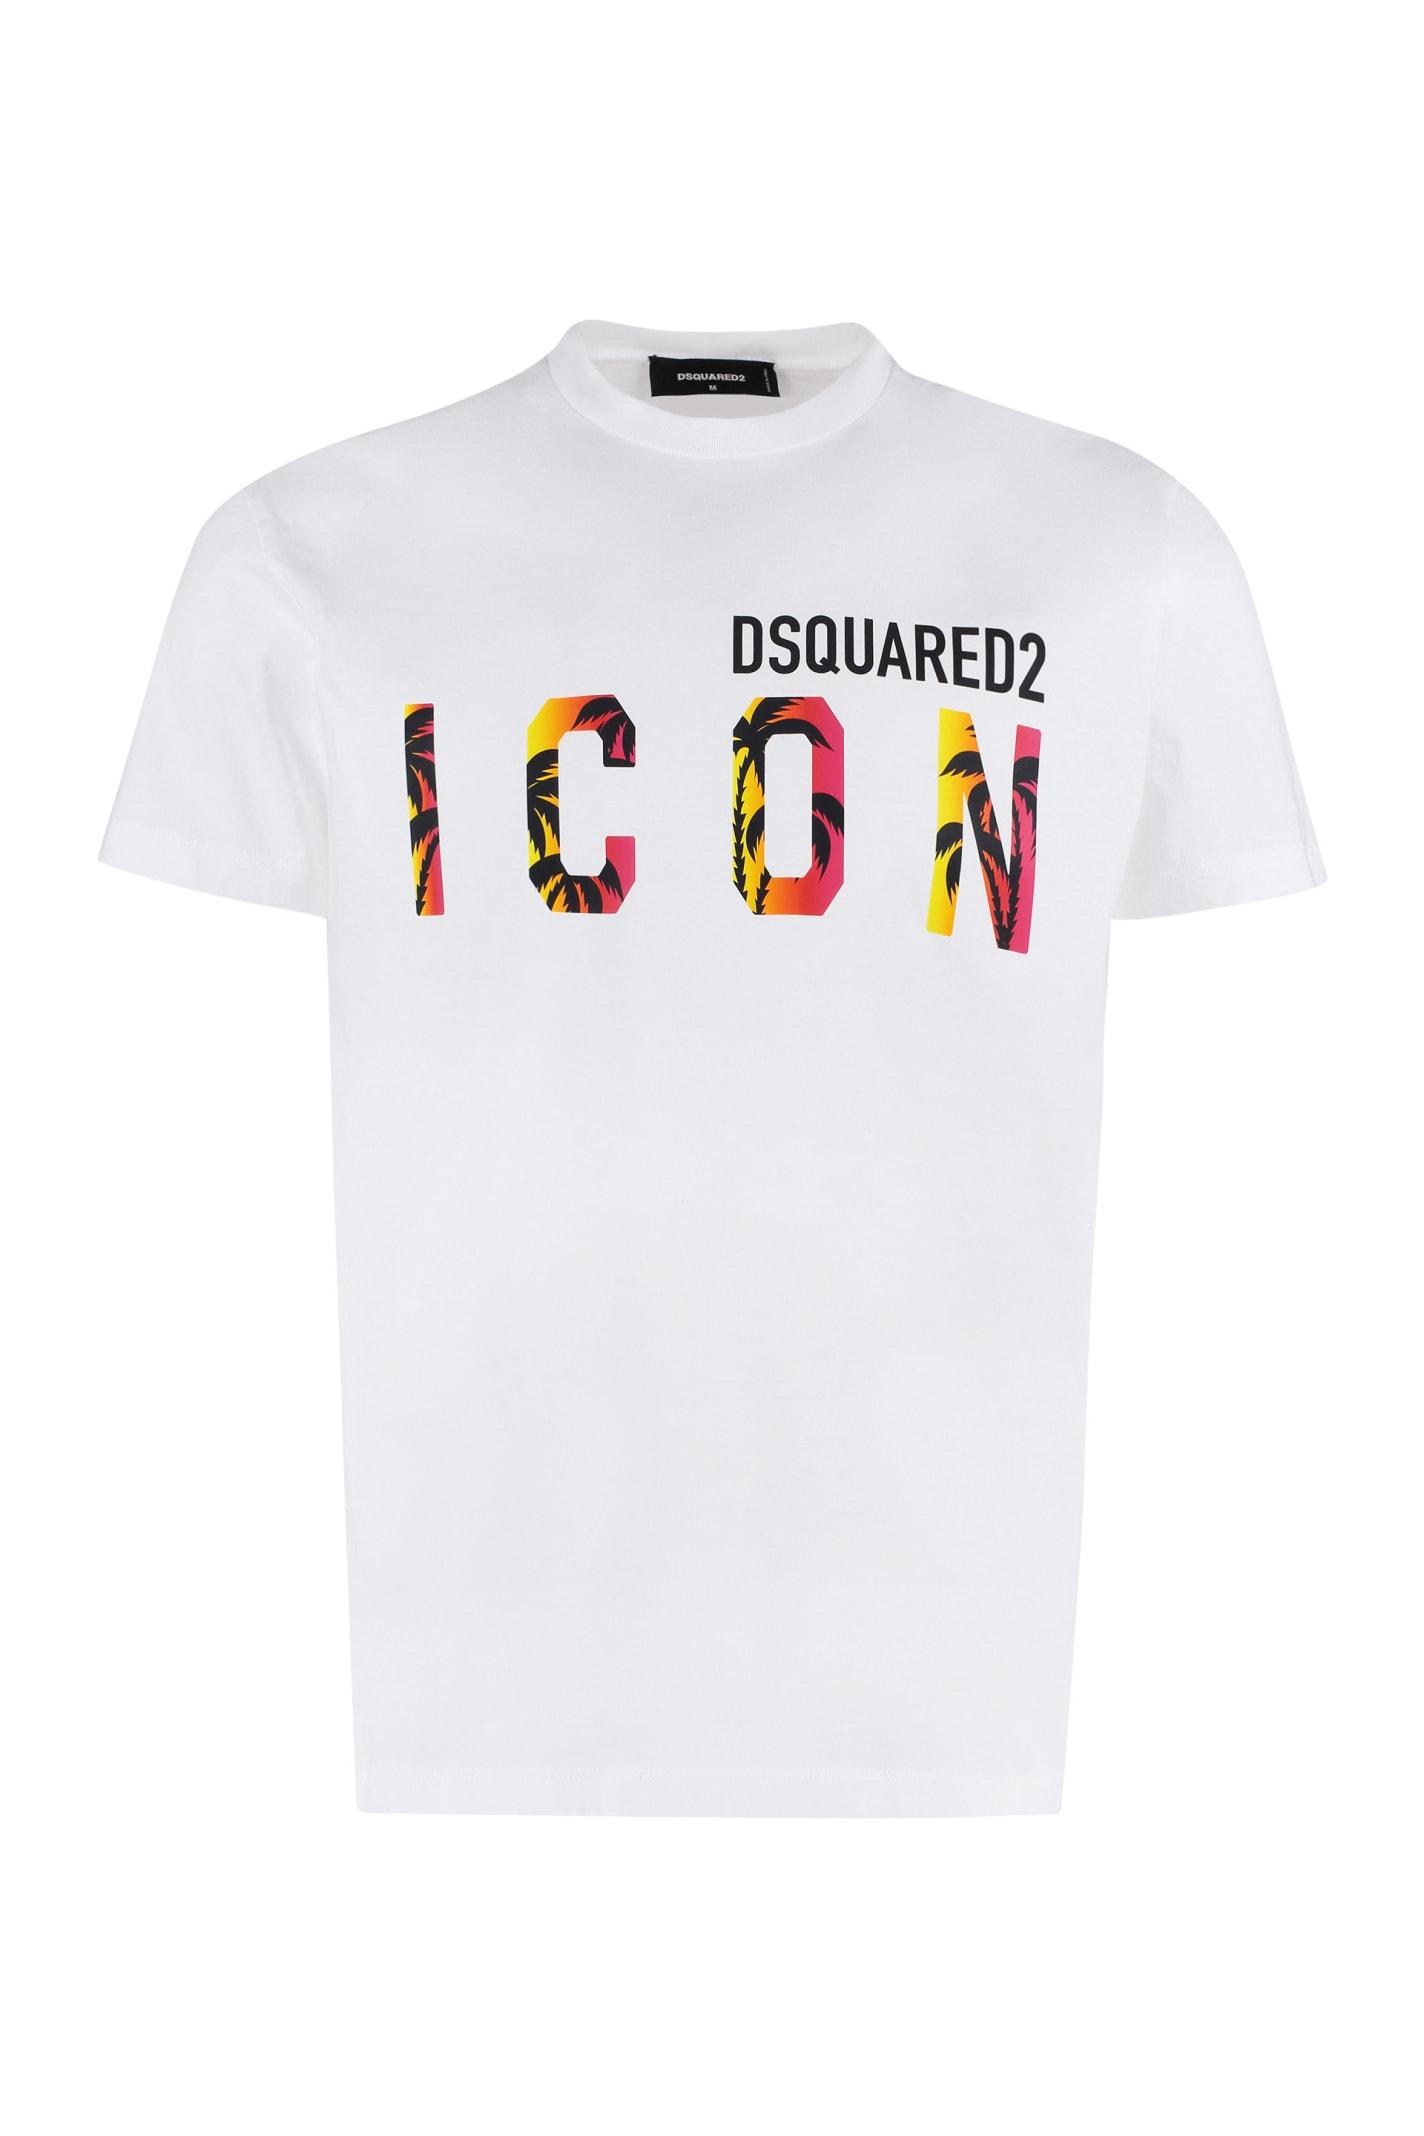 DSquared² Icon Cotton T-shirt in White for Men | Lyst